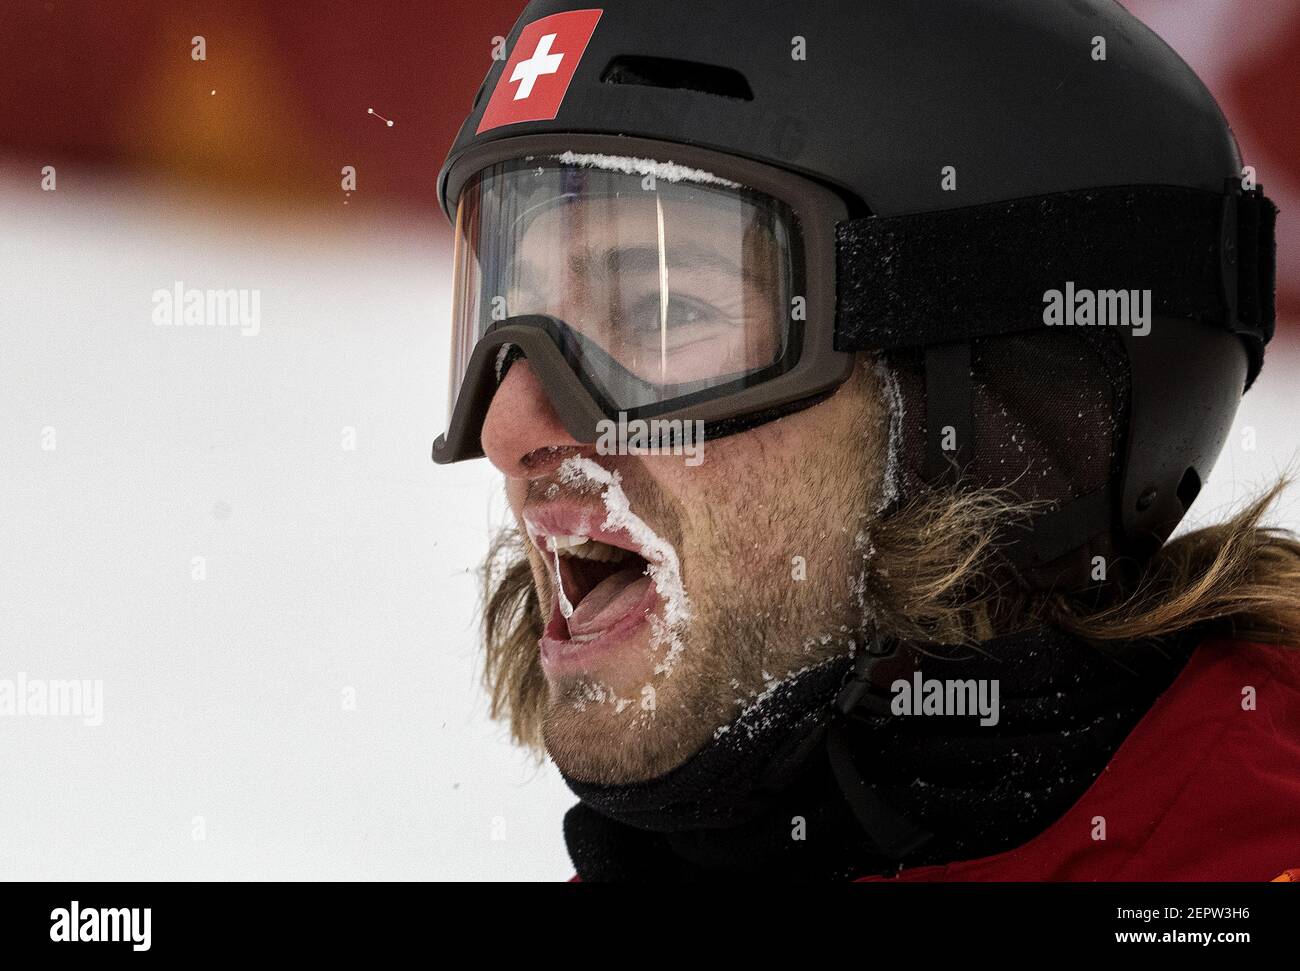 Patrick Burgener of Switzerland after his first run in the Men's Half Pipe Snowboard finals at Phoenix Park in South Korea on Wednesday, Feb. 14, 2018, during the Pyeongchang Winter Olympics. (Photo by Carlos Gonzalez/Minneapolis Star Tribune/TNS/Sipa USA) Stock Photo